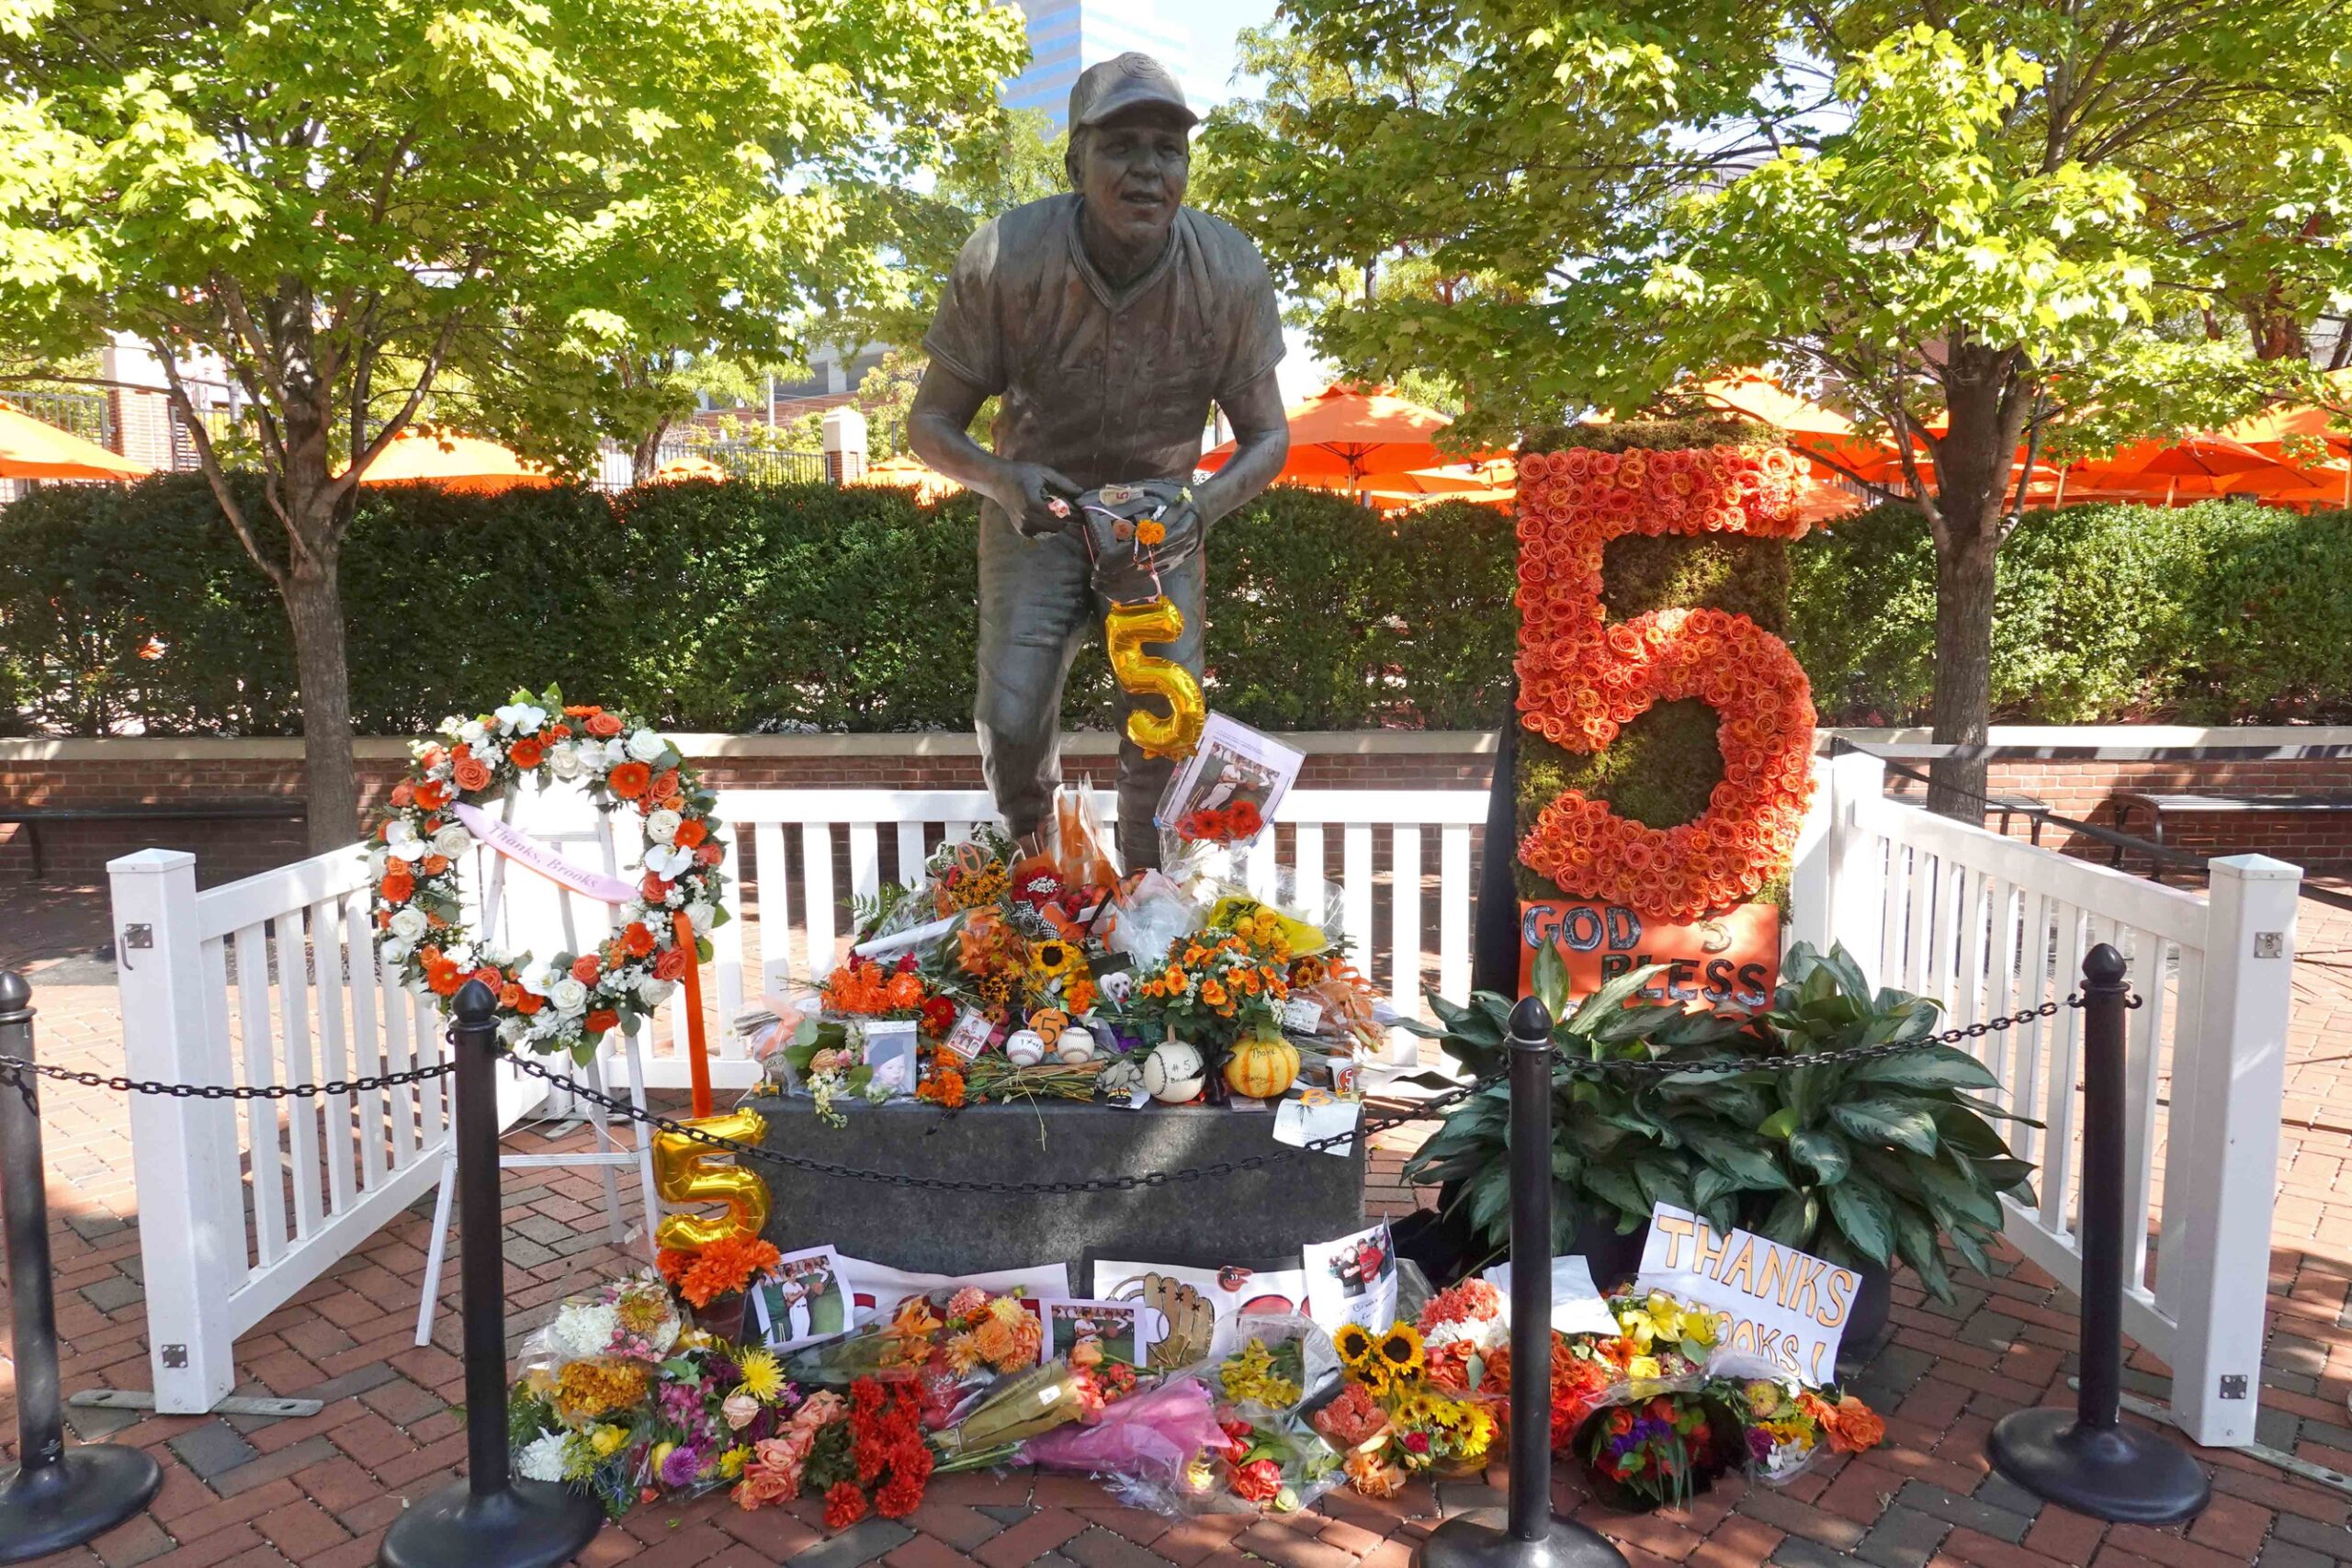 Family, Teammates, Fans, and Current Orioles Remember Brooks Robinson